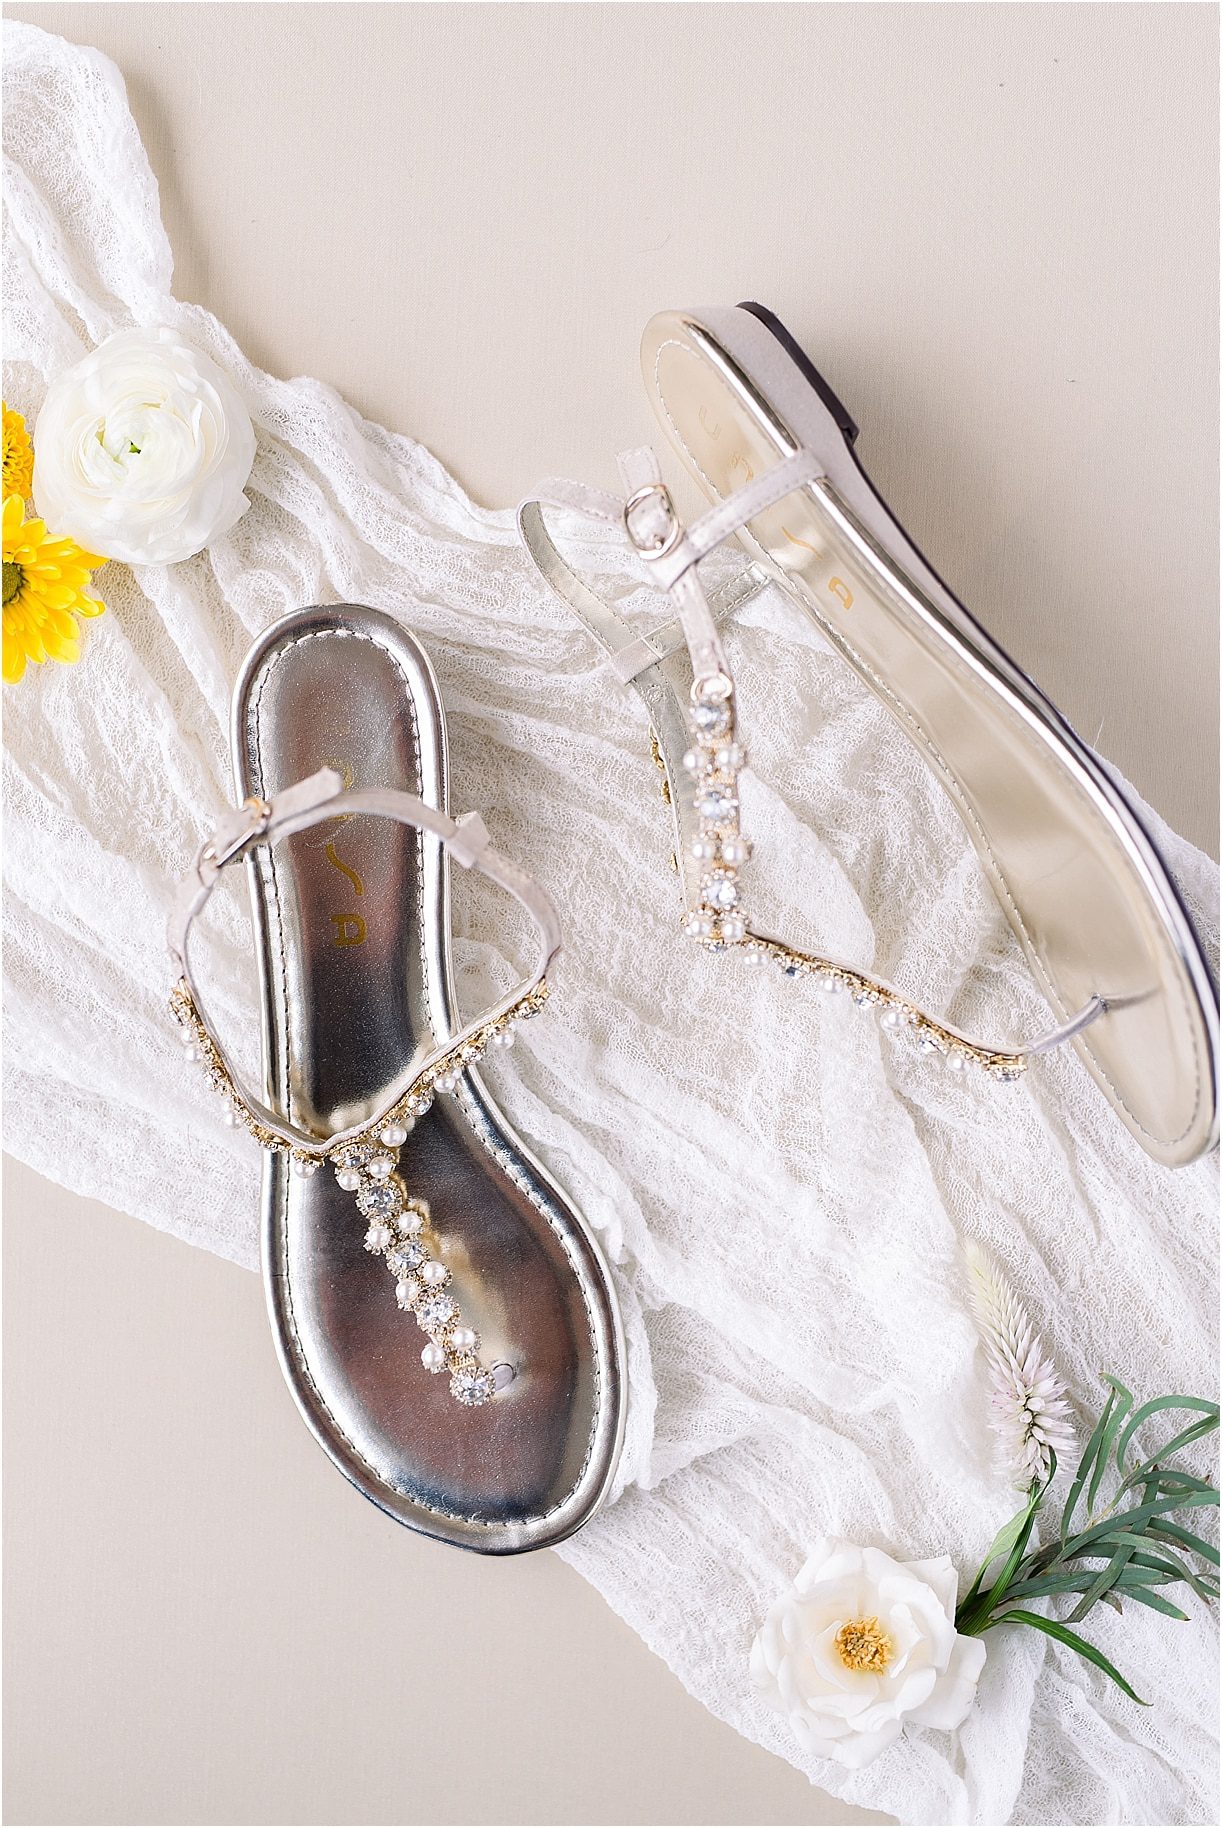 Light Blue and Yellow Wedding | Hill City Bride Wedding Blog Shoes